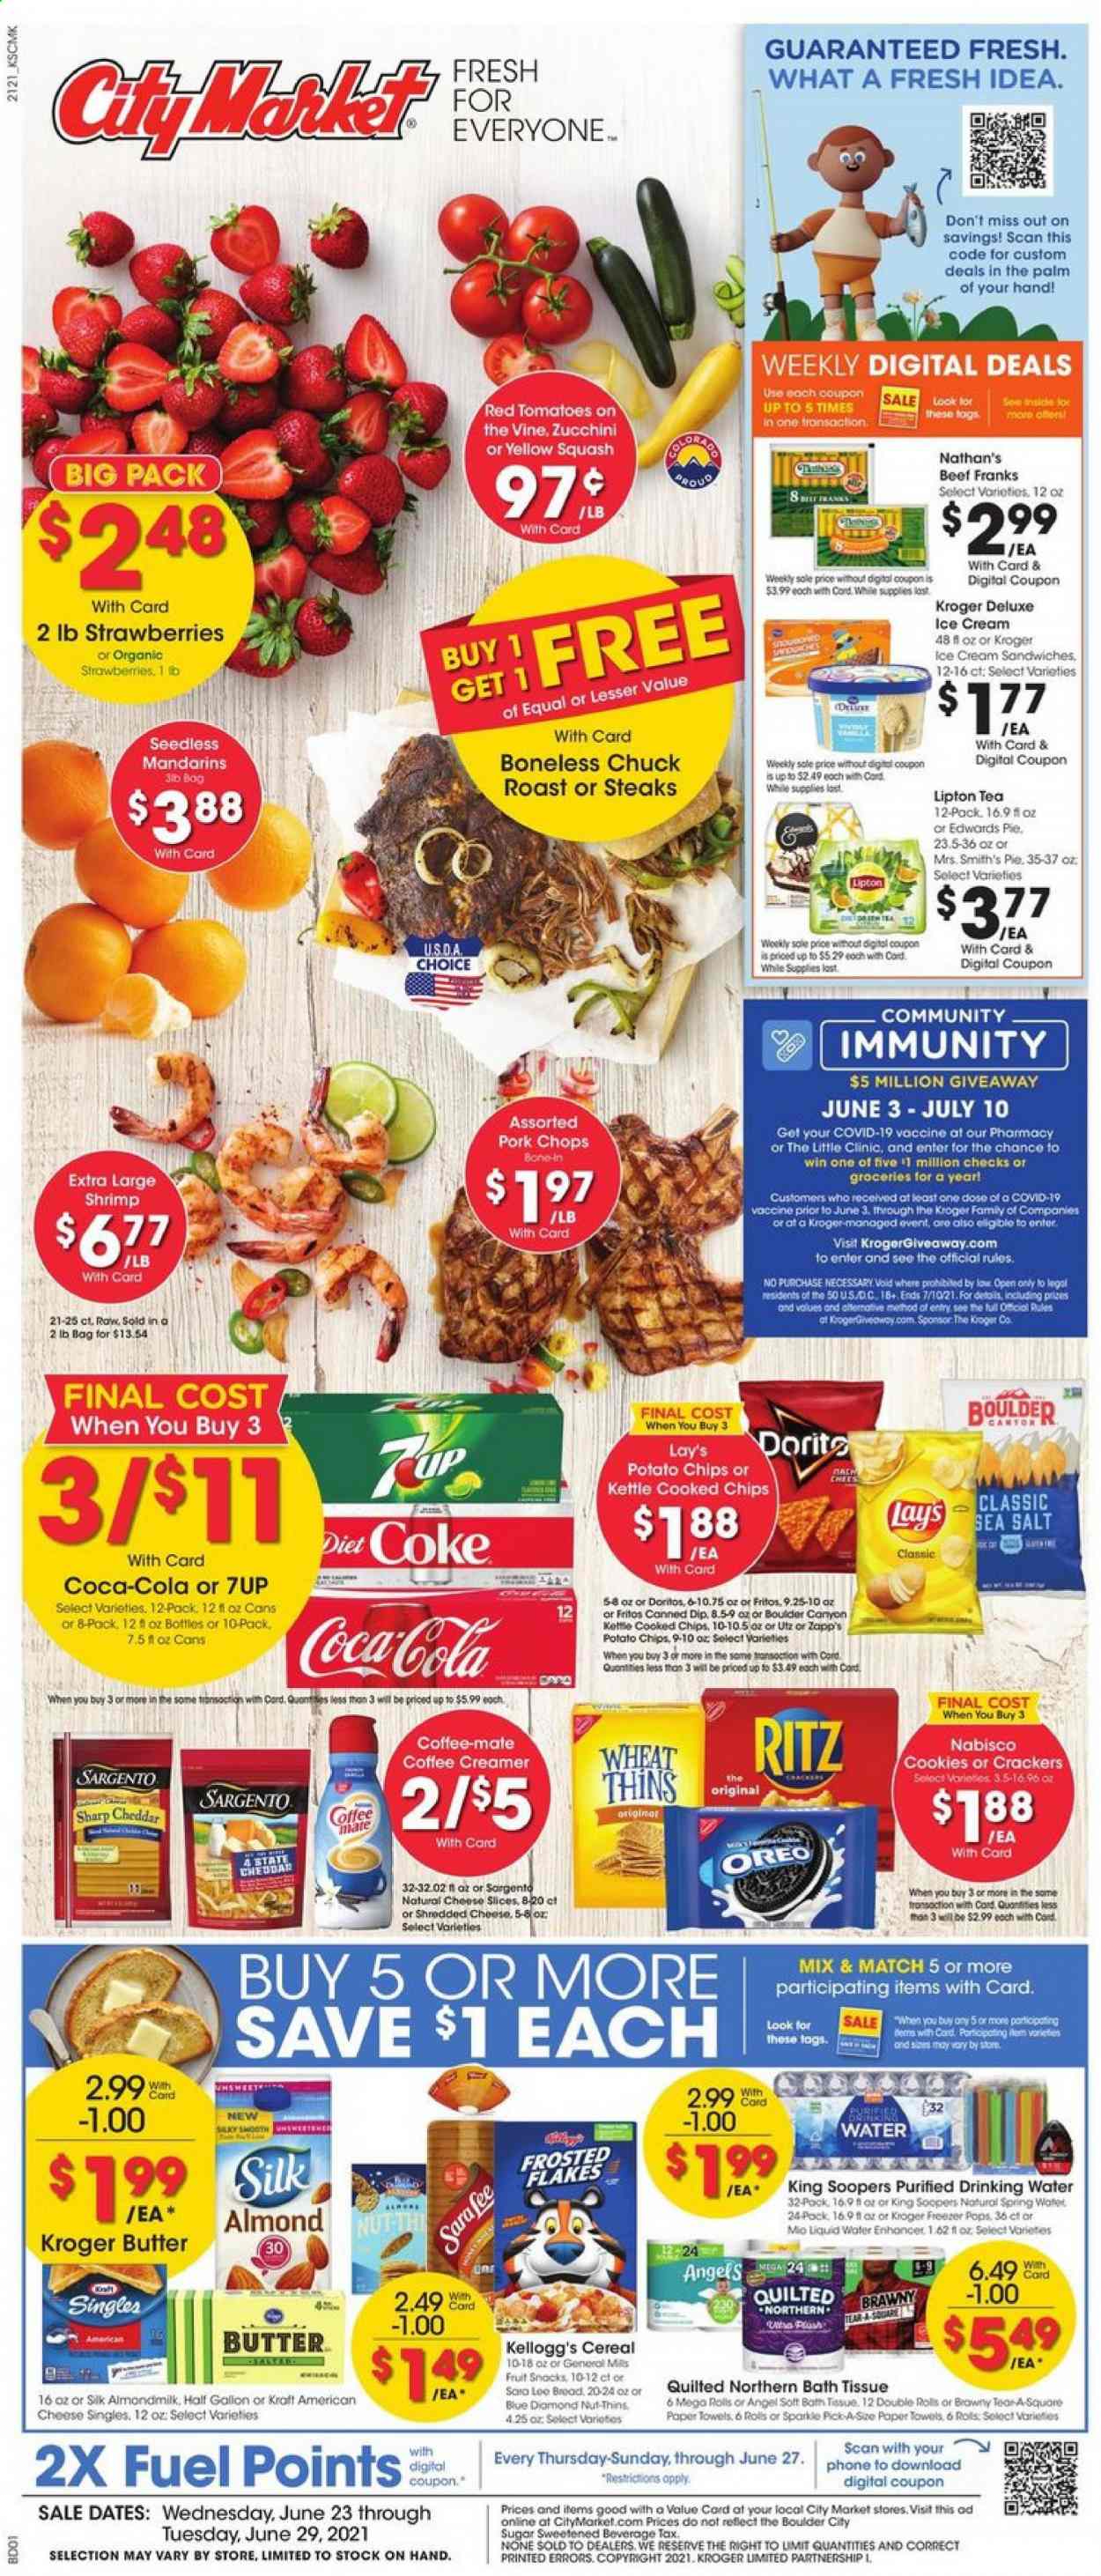 thumbnail - City Market Flyer - 06/23/2021 - 06/29/2021 - Sales products - pie, tomatoes, zucchini, yellow squash, mandarines, strawberries, shrimps, Kraft®, american cheese, shredded cheese, sliced cheese, Sargento, Oreo, almond milk, Coffee-Mate, butter, creamer, dip, ice cream, cookies, crackers, Kellogg's, fruit snack, RITZ, Doritos, Fritos, potato chips, chips, Lay’s, Smith's, Thins, cereals, Frosted Flakes, Coca-Cola, Lipton, Diet Coke, 7UP, tea, beef meat, steak, chuck roast, pork chops, pork meat, bath tissue, Quilted Northern, kitchen towels, paper towels, gallon, car battery. Page 1.